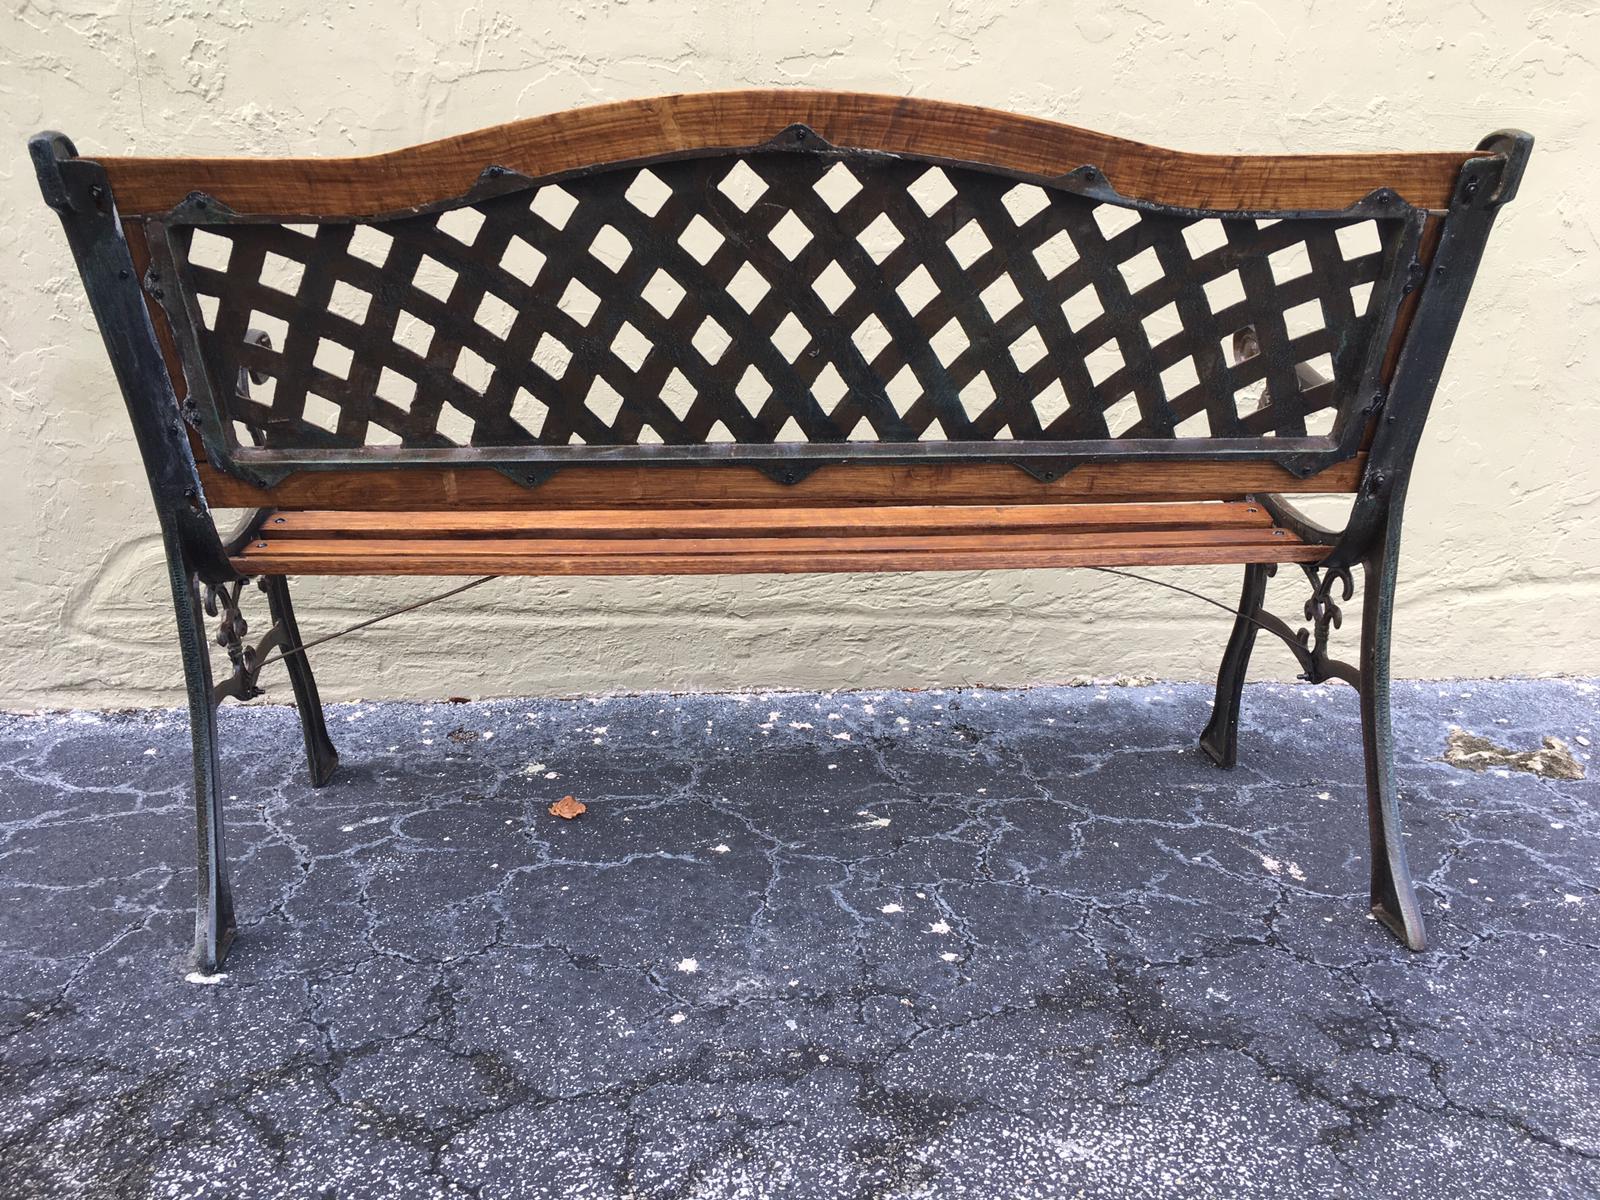 20th century oak and cast iron garden or park bench.